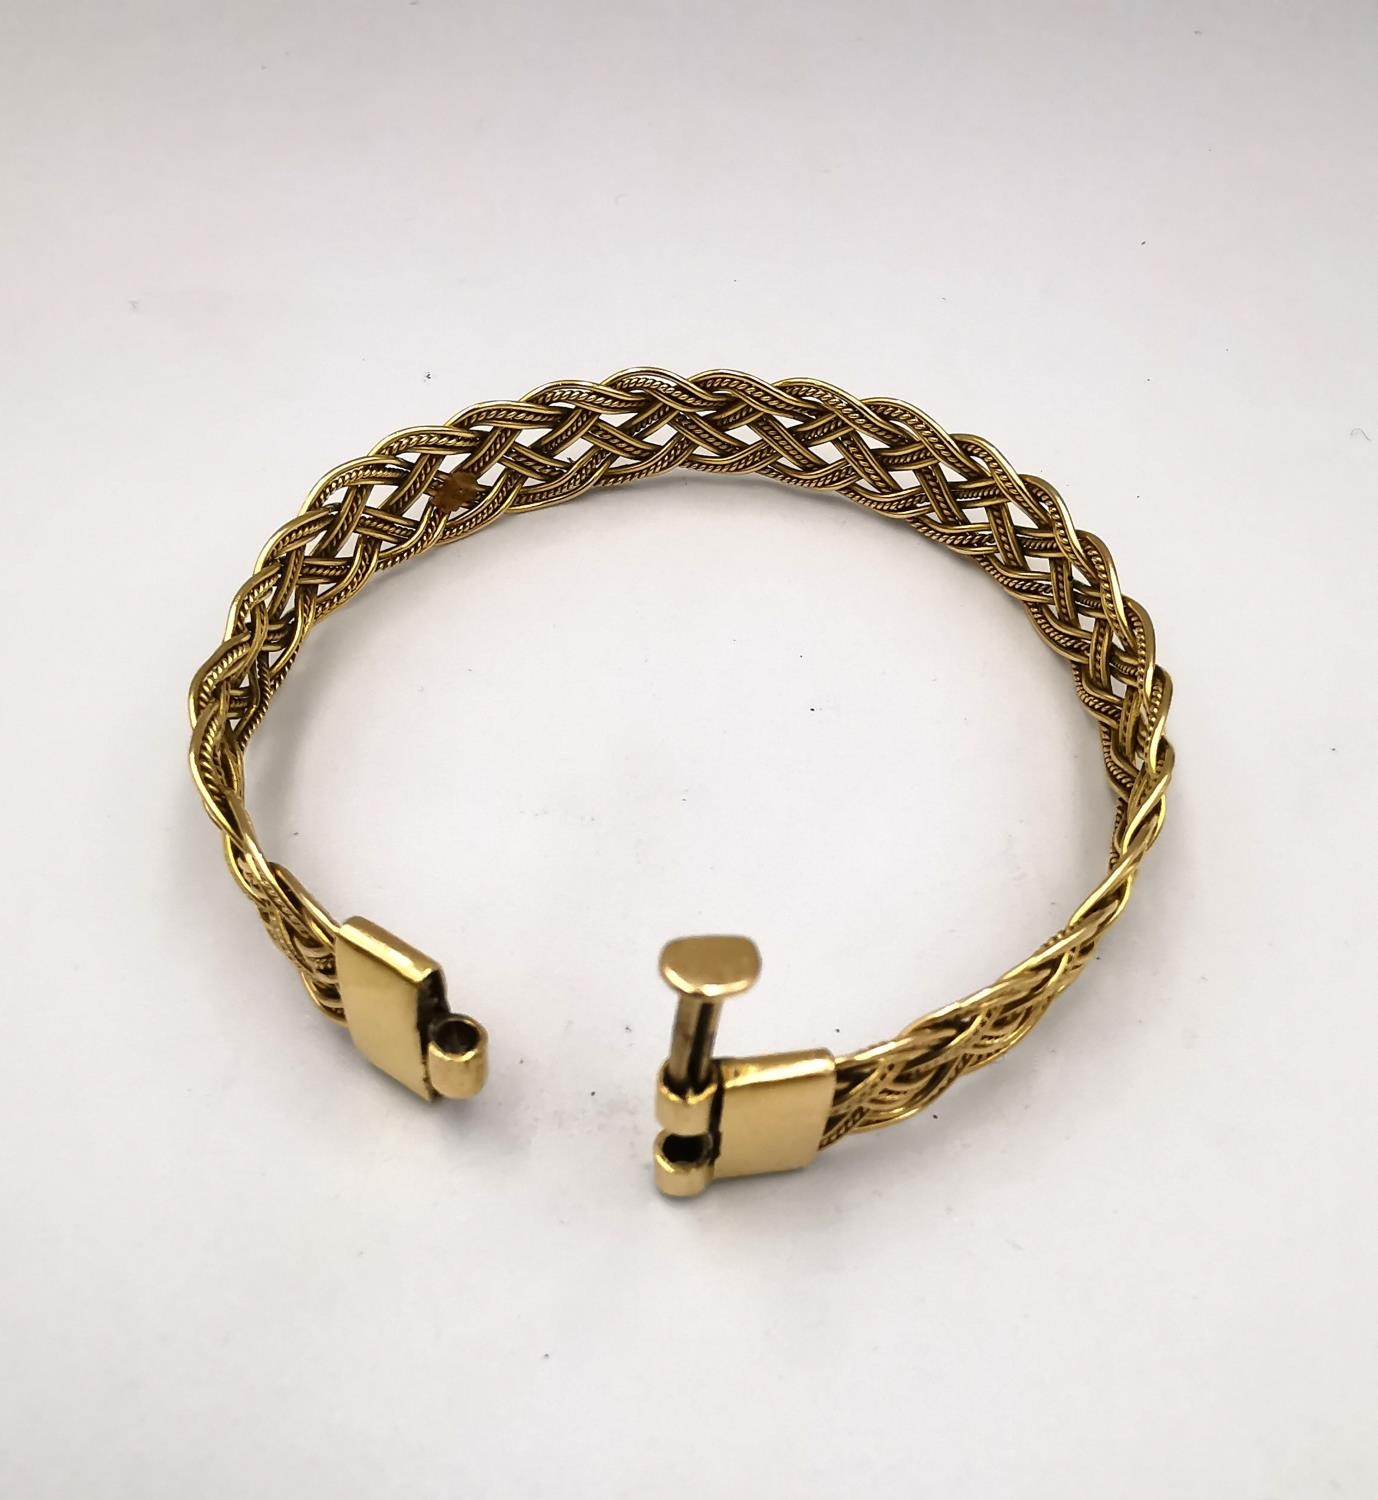 A woven gold plated wirework plaited bracelet with pin fastening. Diameter 6cm. Weight 18.62g. - Image 6 of 10